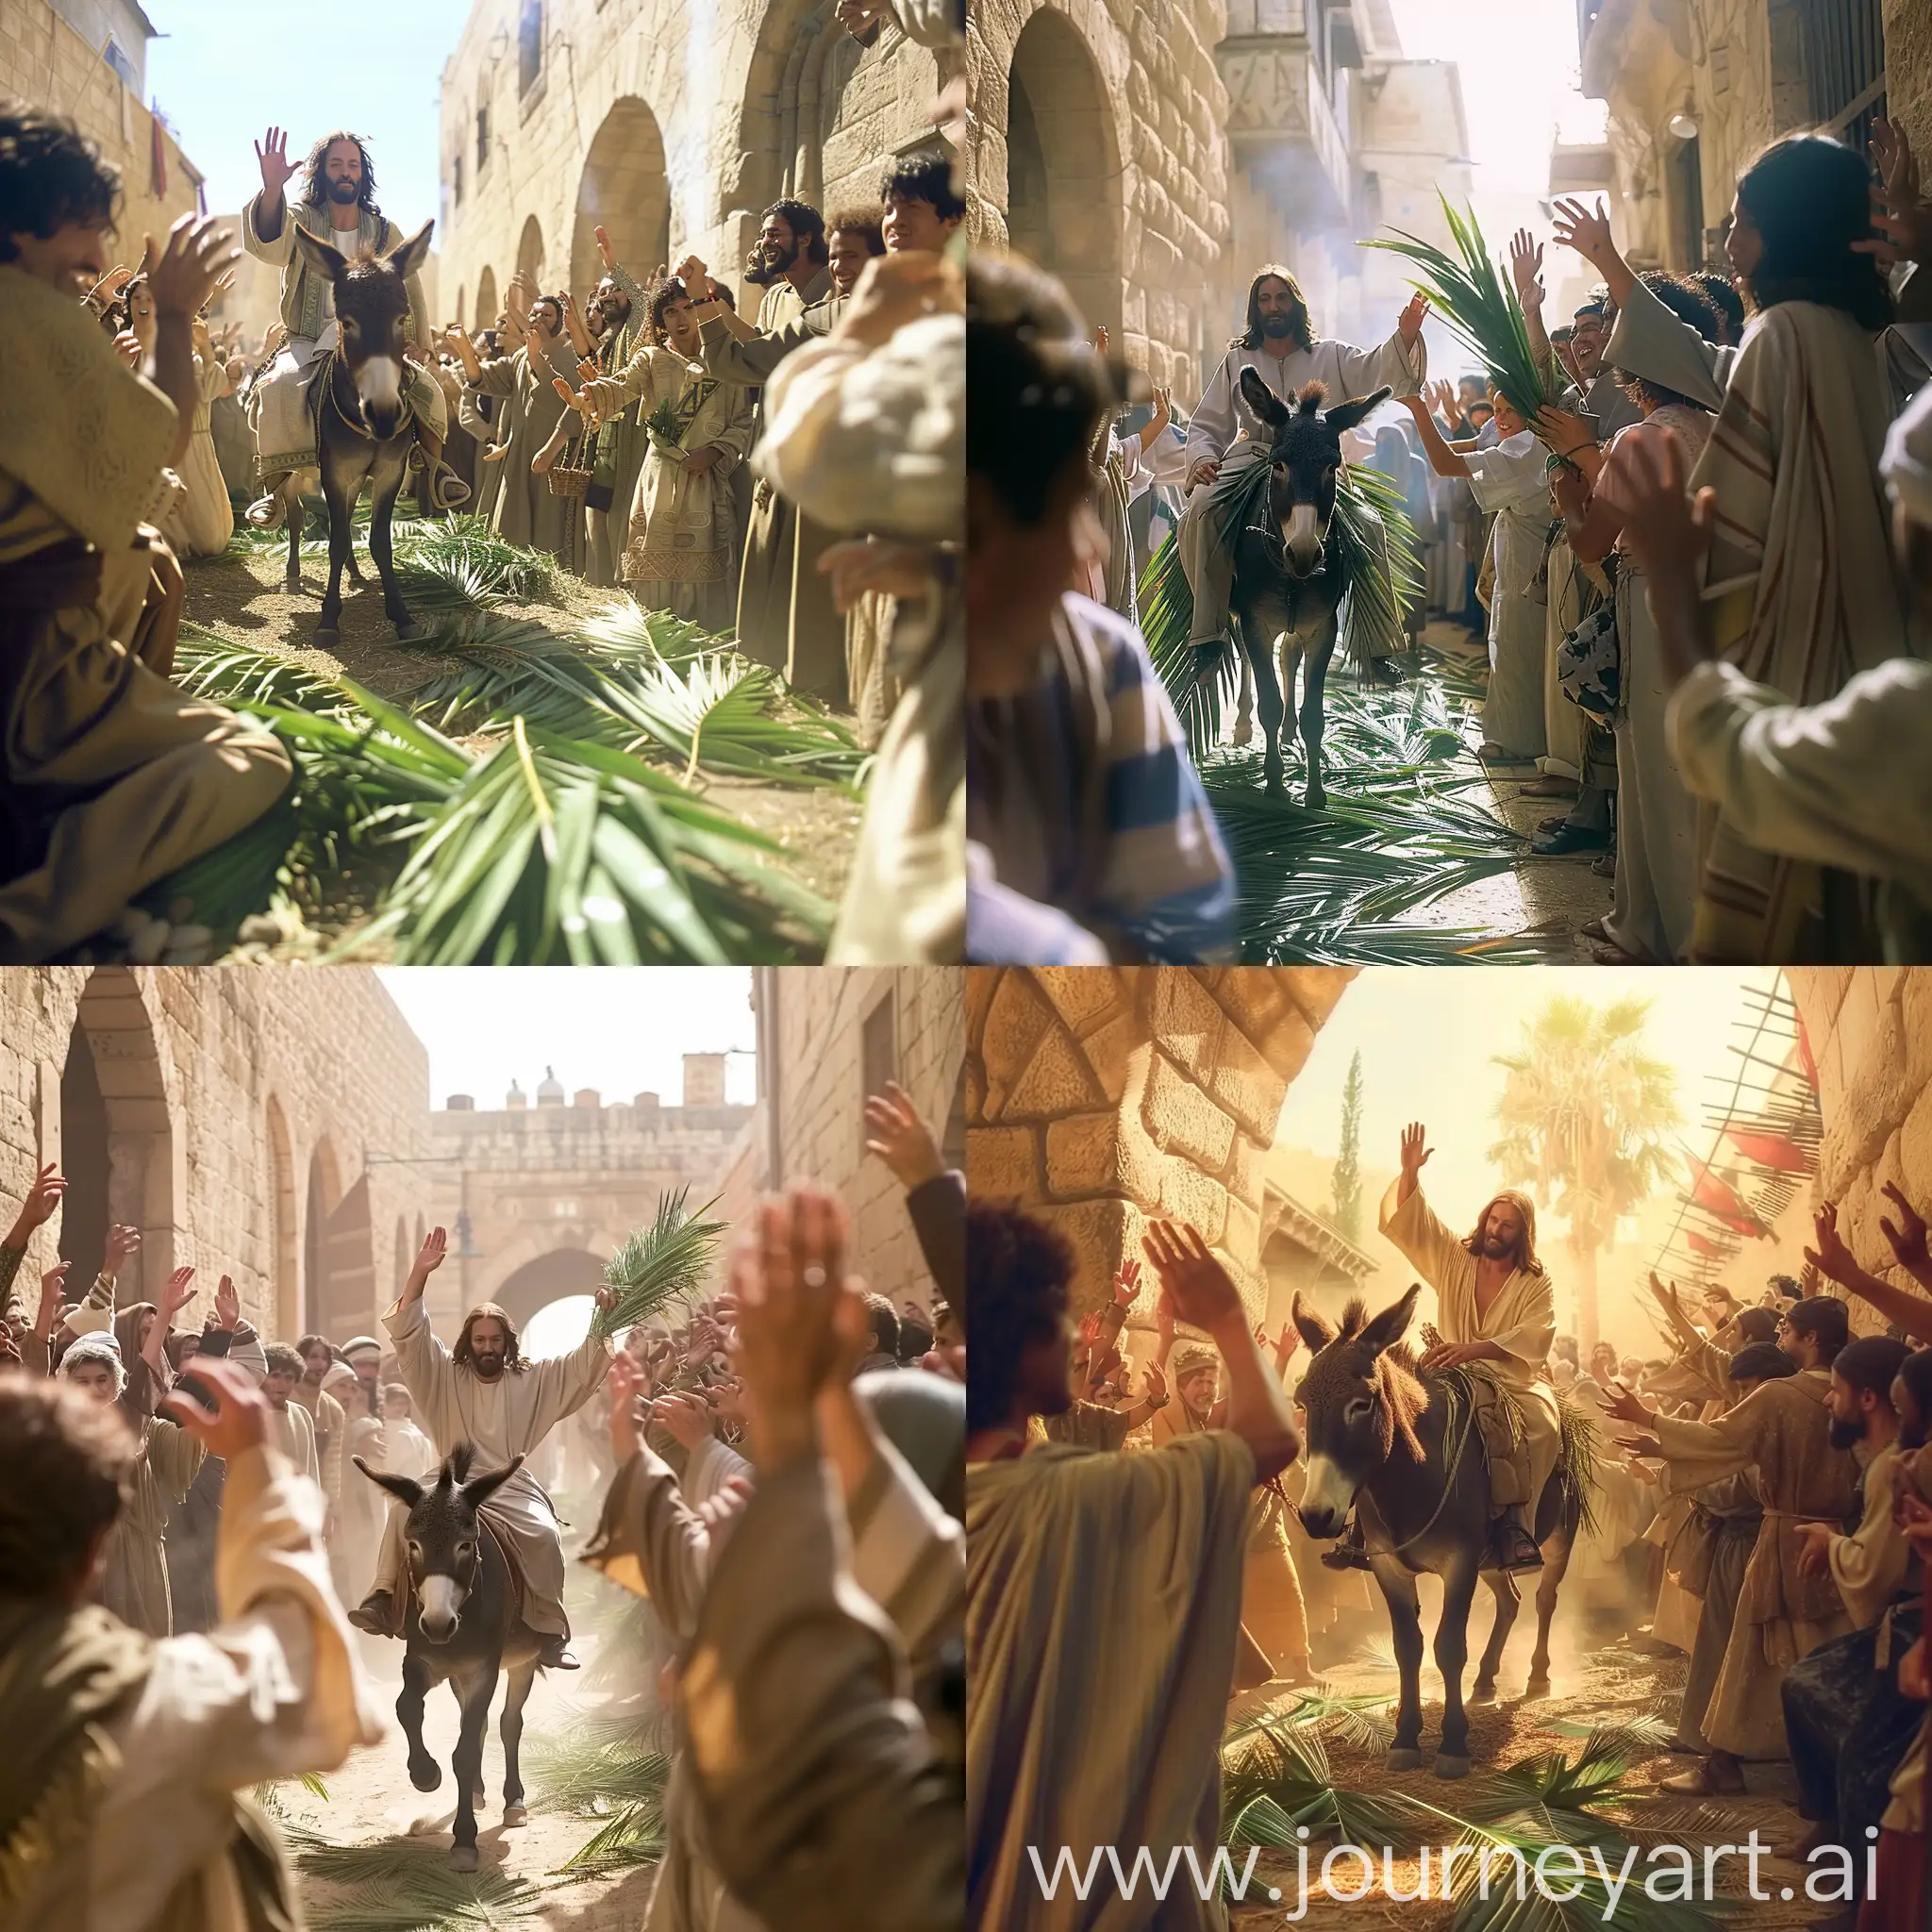 As Jesus sits on q donkey and enters Jerusalem, people wave and lay palm leaves on the ground to welcome him, midevil times, olden times, sunny day, crowds cheering and happy,